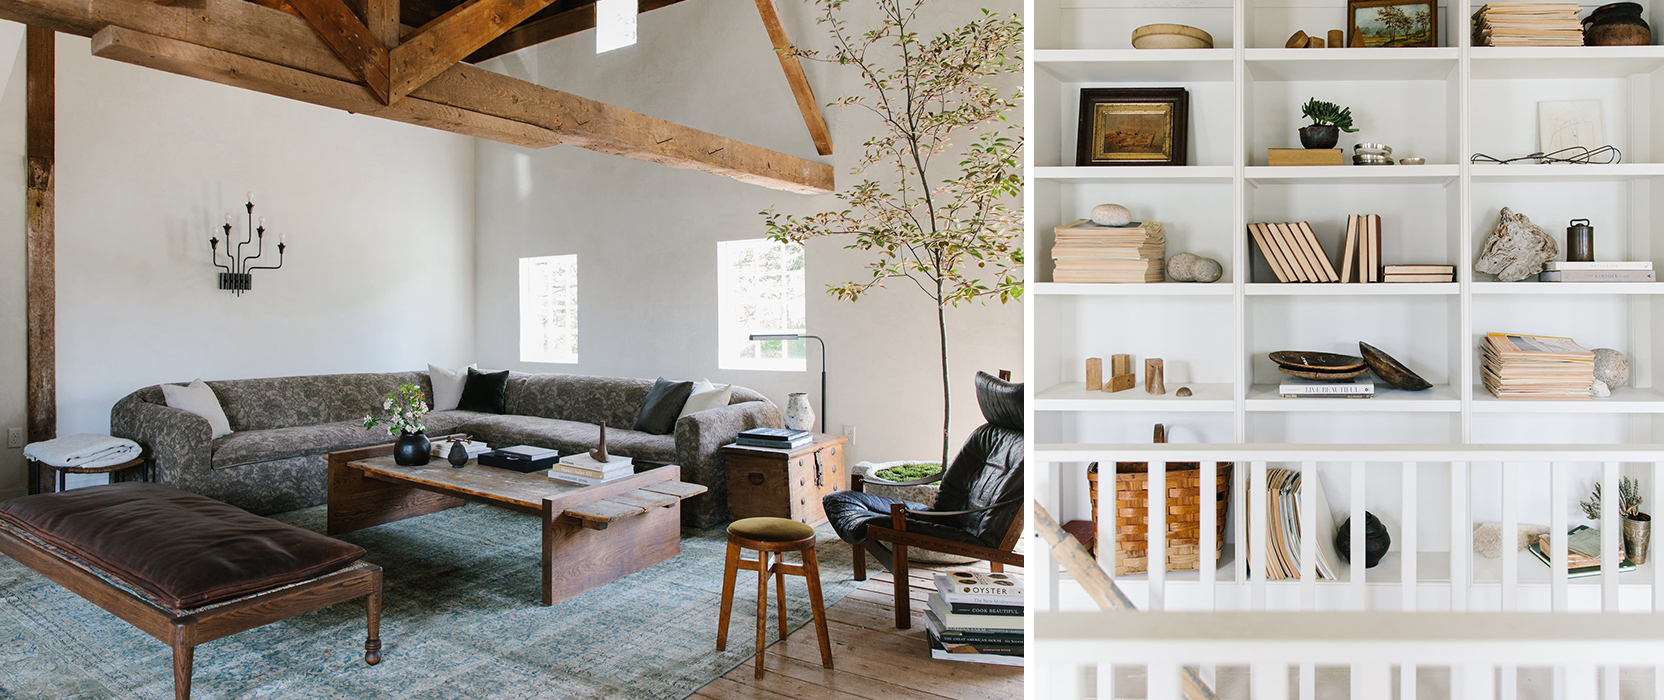 Left image: Spacious great room with high ceilings, exposed wood beams, white walls and modern rustic furnishings. Right image: White built-in shelving filled with books and decor.